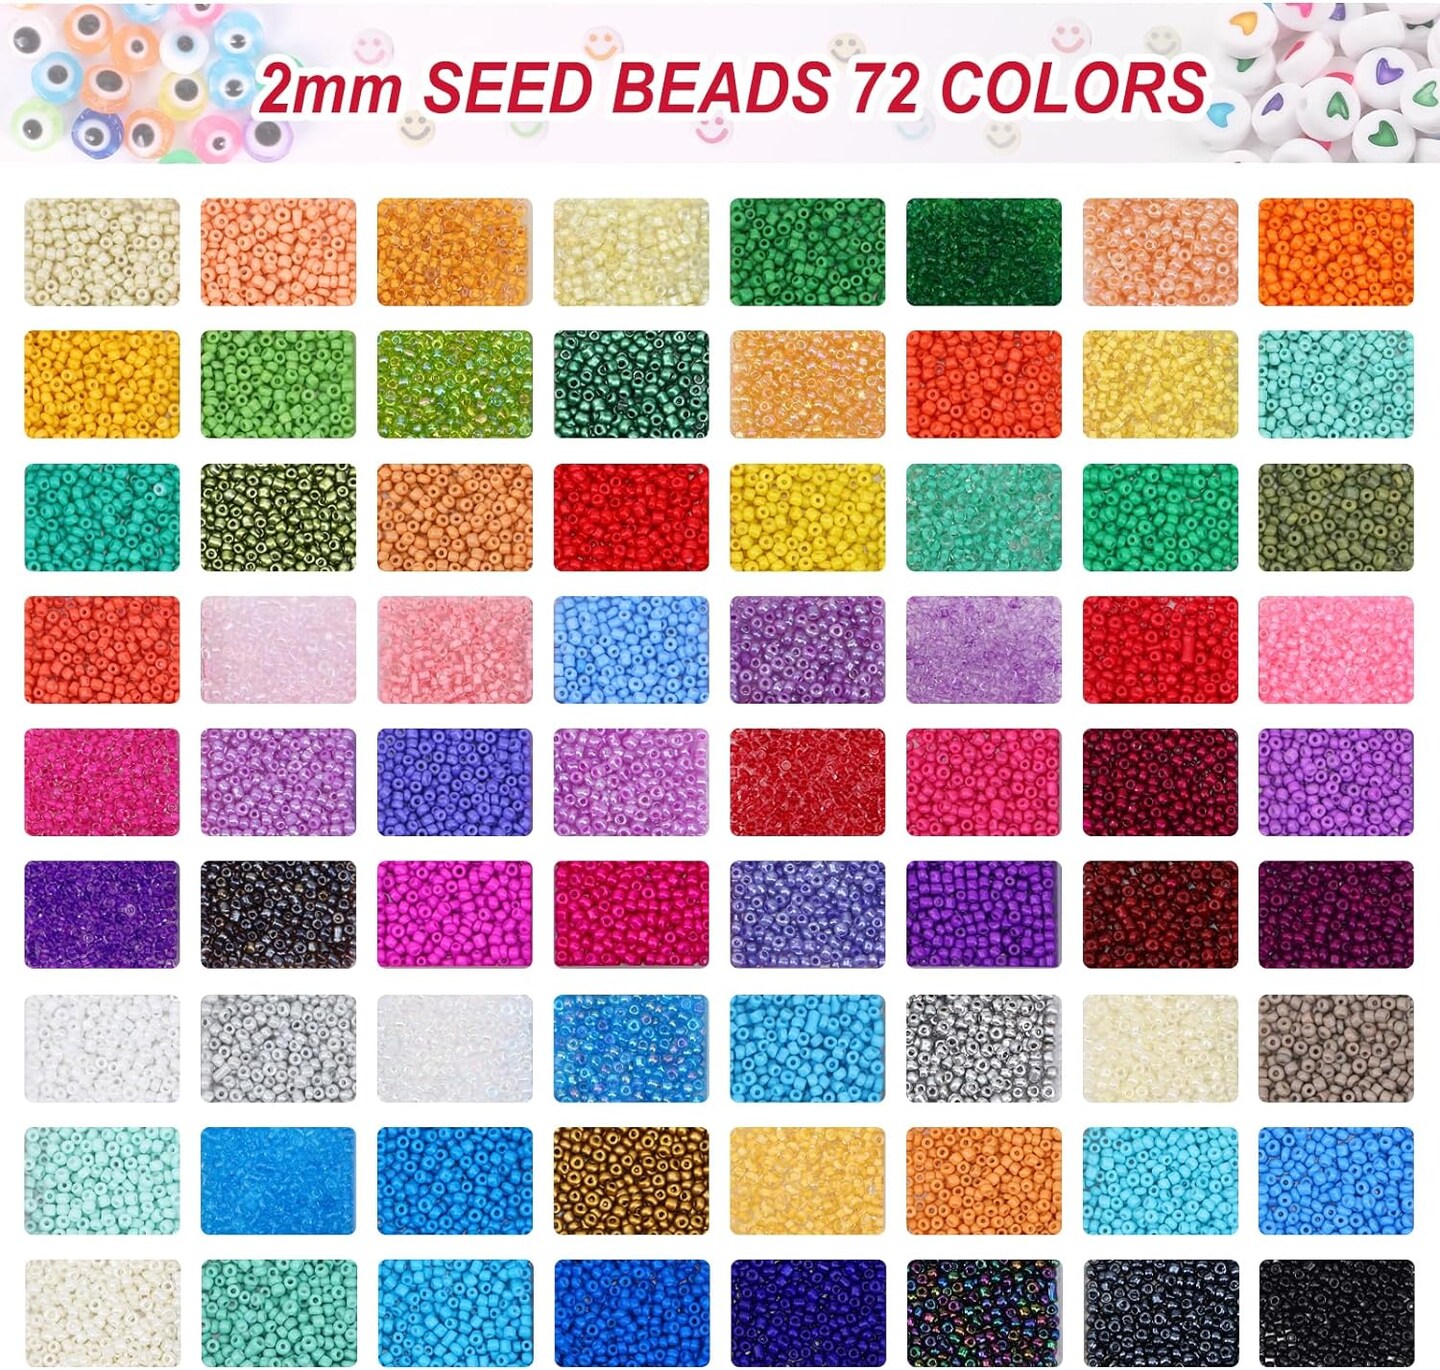 20160pcs 72 Colors, 2mm Glass Seed Beads for Bracelet Making Kit, Small Beads for Jewelry Making with Letter Beads for Crafts Gifts